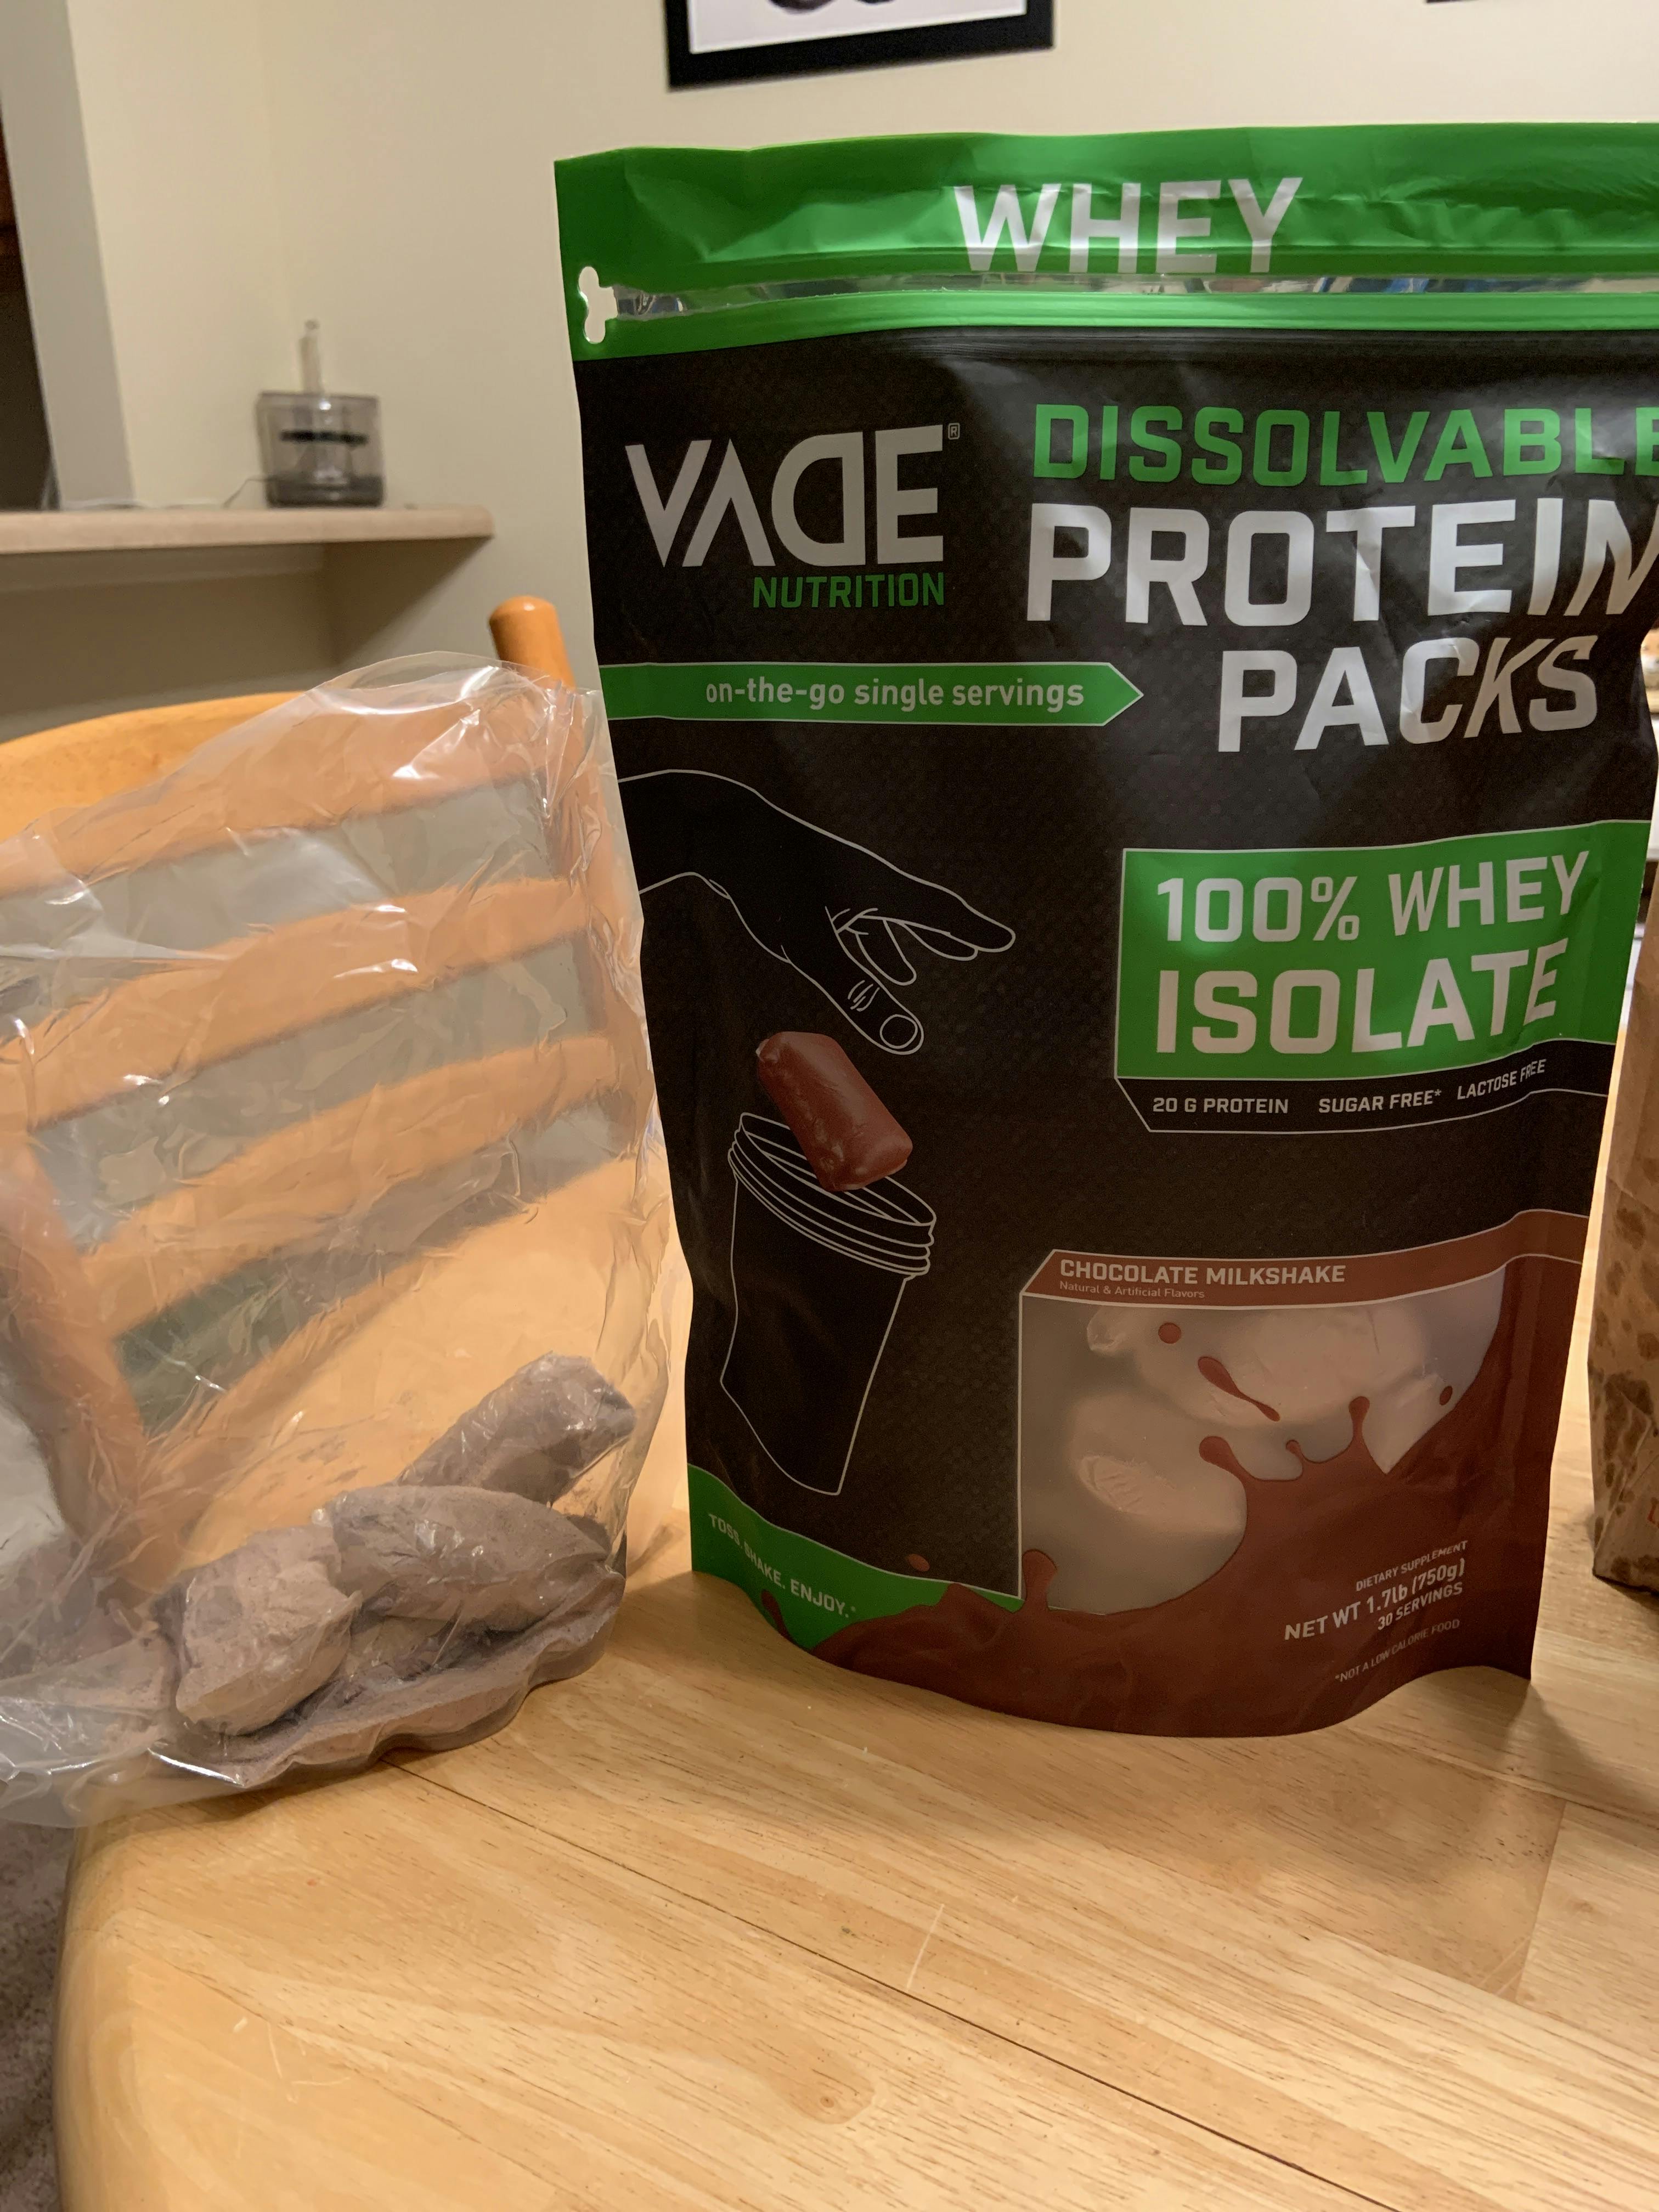 VADE Nutrition Dissolvable Protein Packs - 100% Whey Isolate Protein Powder  Chocolate Milkshake - Low Carb, Low Calorie, Lactose Free, Sugar Free, Fat